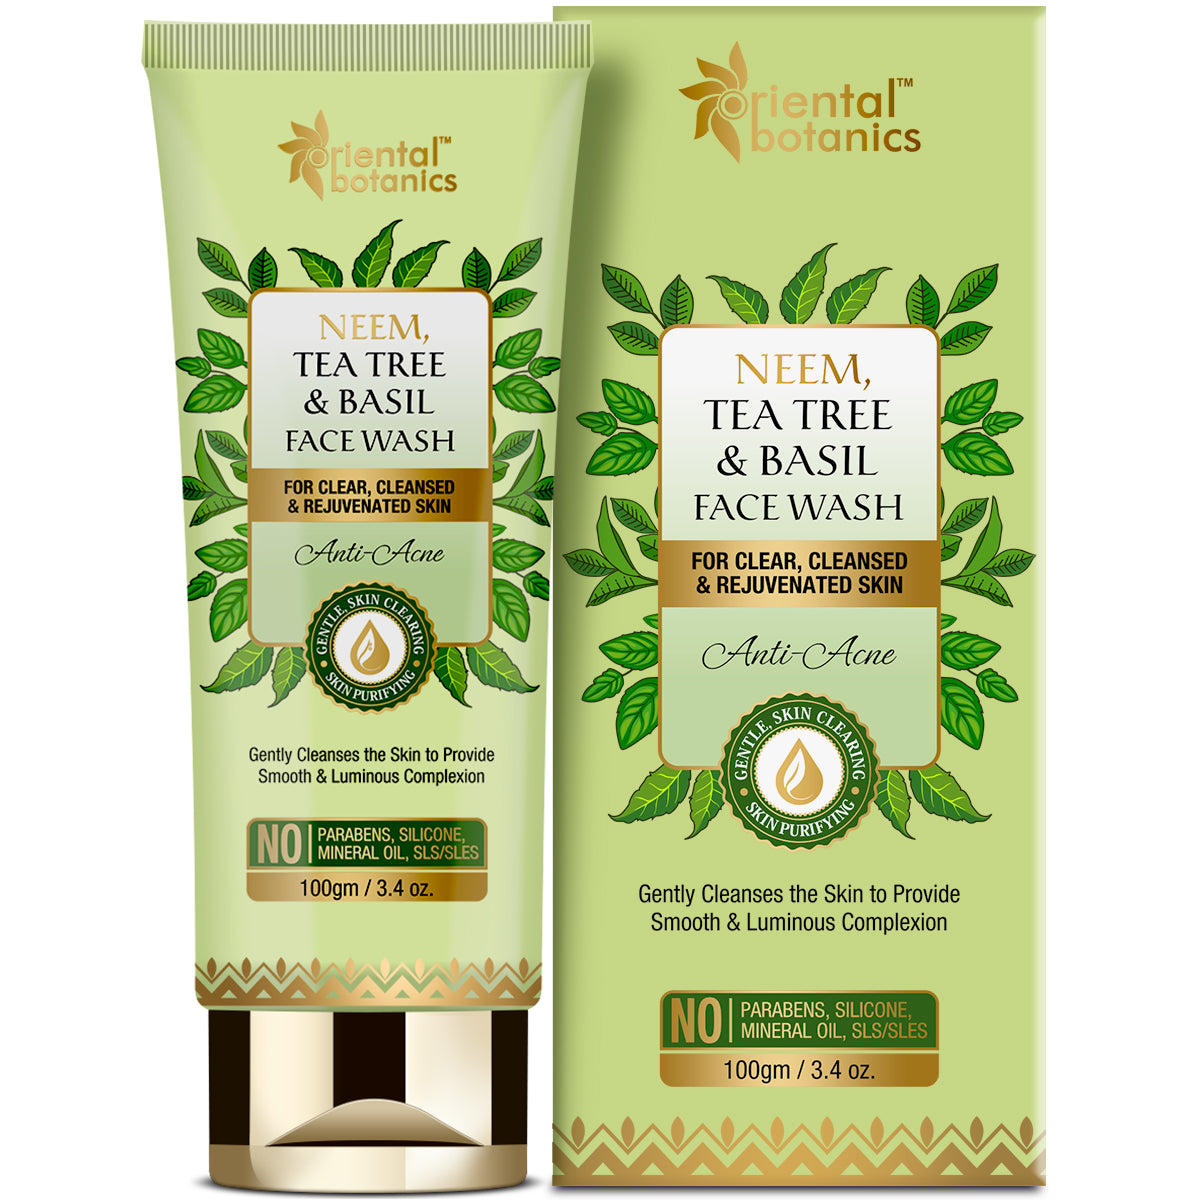 Oriental Botanics Neem, Tea Tree and Basil Anti Acne Face Wash - For Clear and Rejuvenated Skin - No Parabens, Silicones, 100 ml